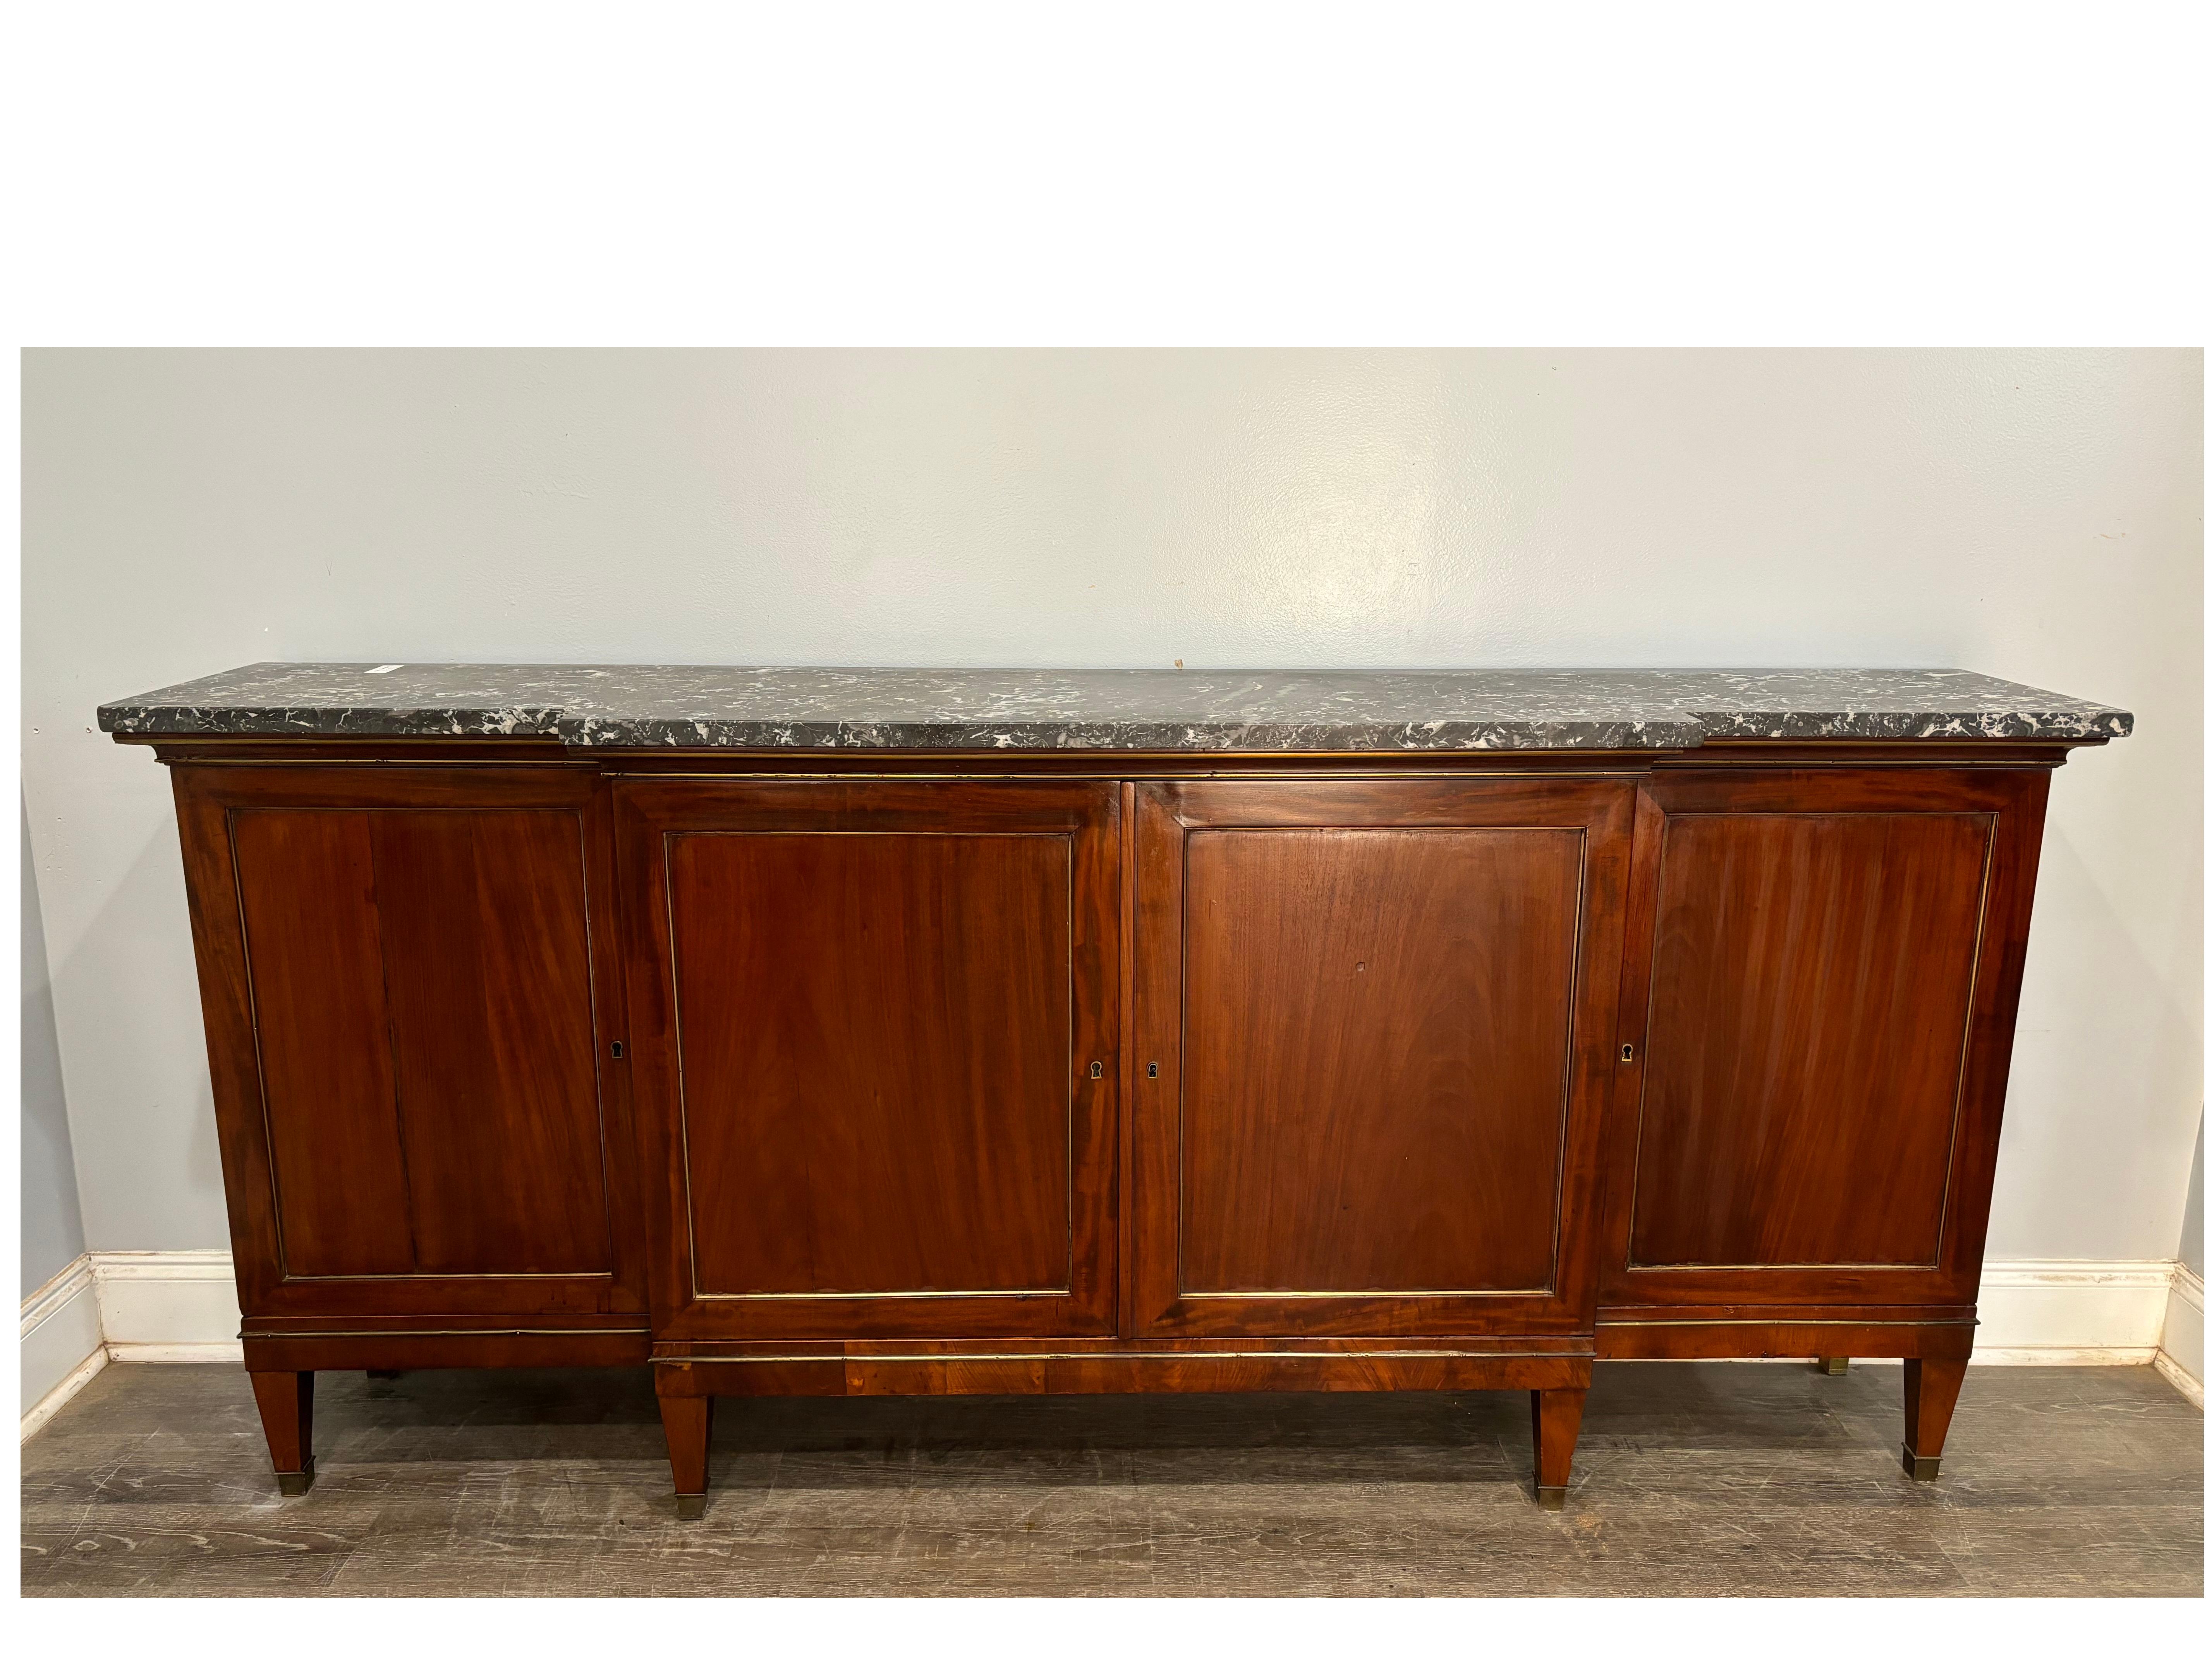 Beautiful Narrow Sideboard made of mahogany with a Sainte-Anne marble top. There are some brass strings around the doors and the sides.